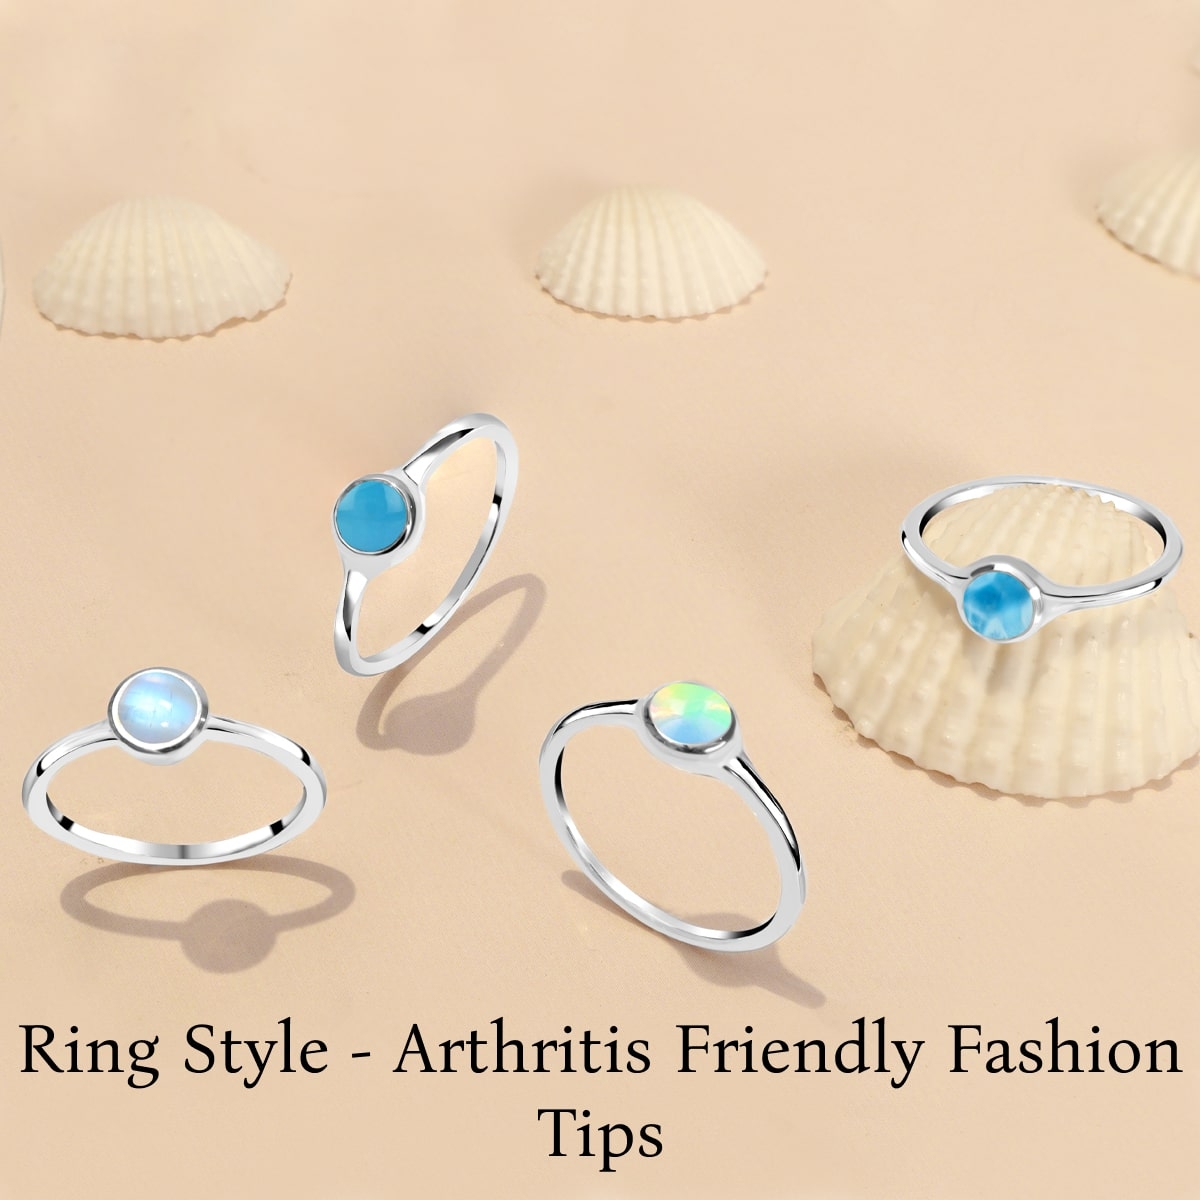 How to Wear Rings with Arthritic Fingers